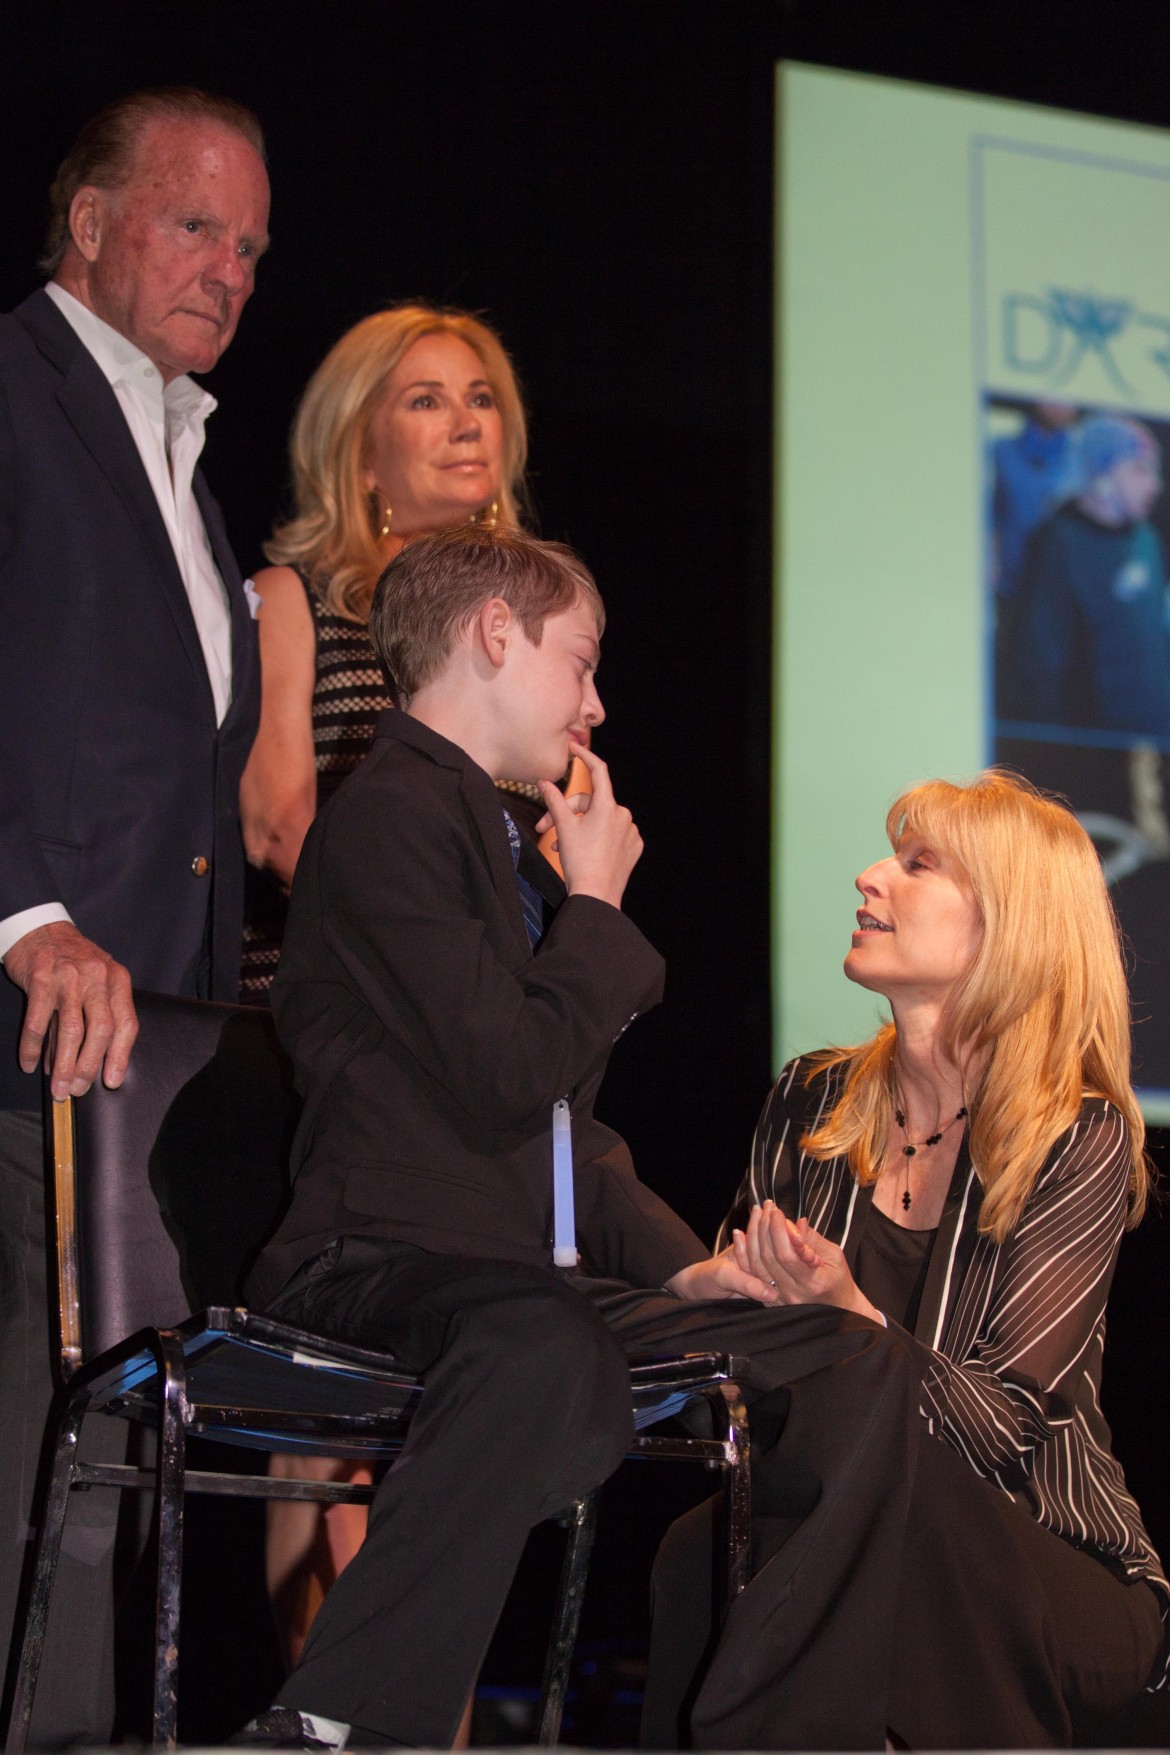 IMG_9378 DIllon and Darlee Papier with Frank and Kathie Lee Gifford- photo credit Cara GIlbride